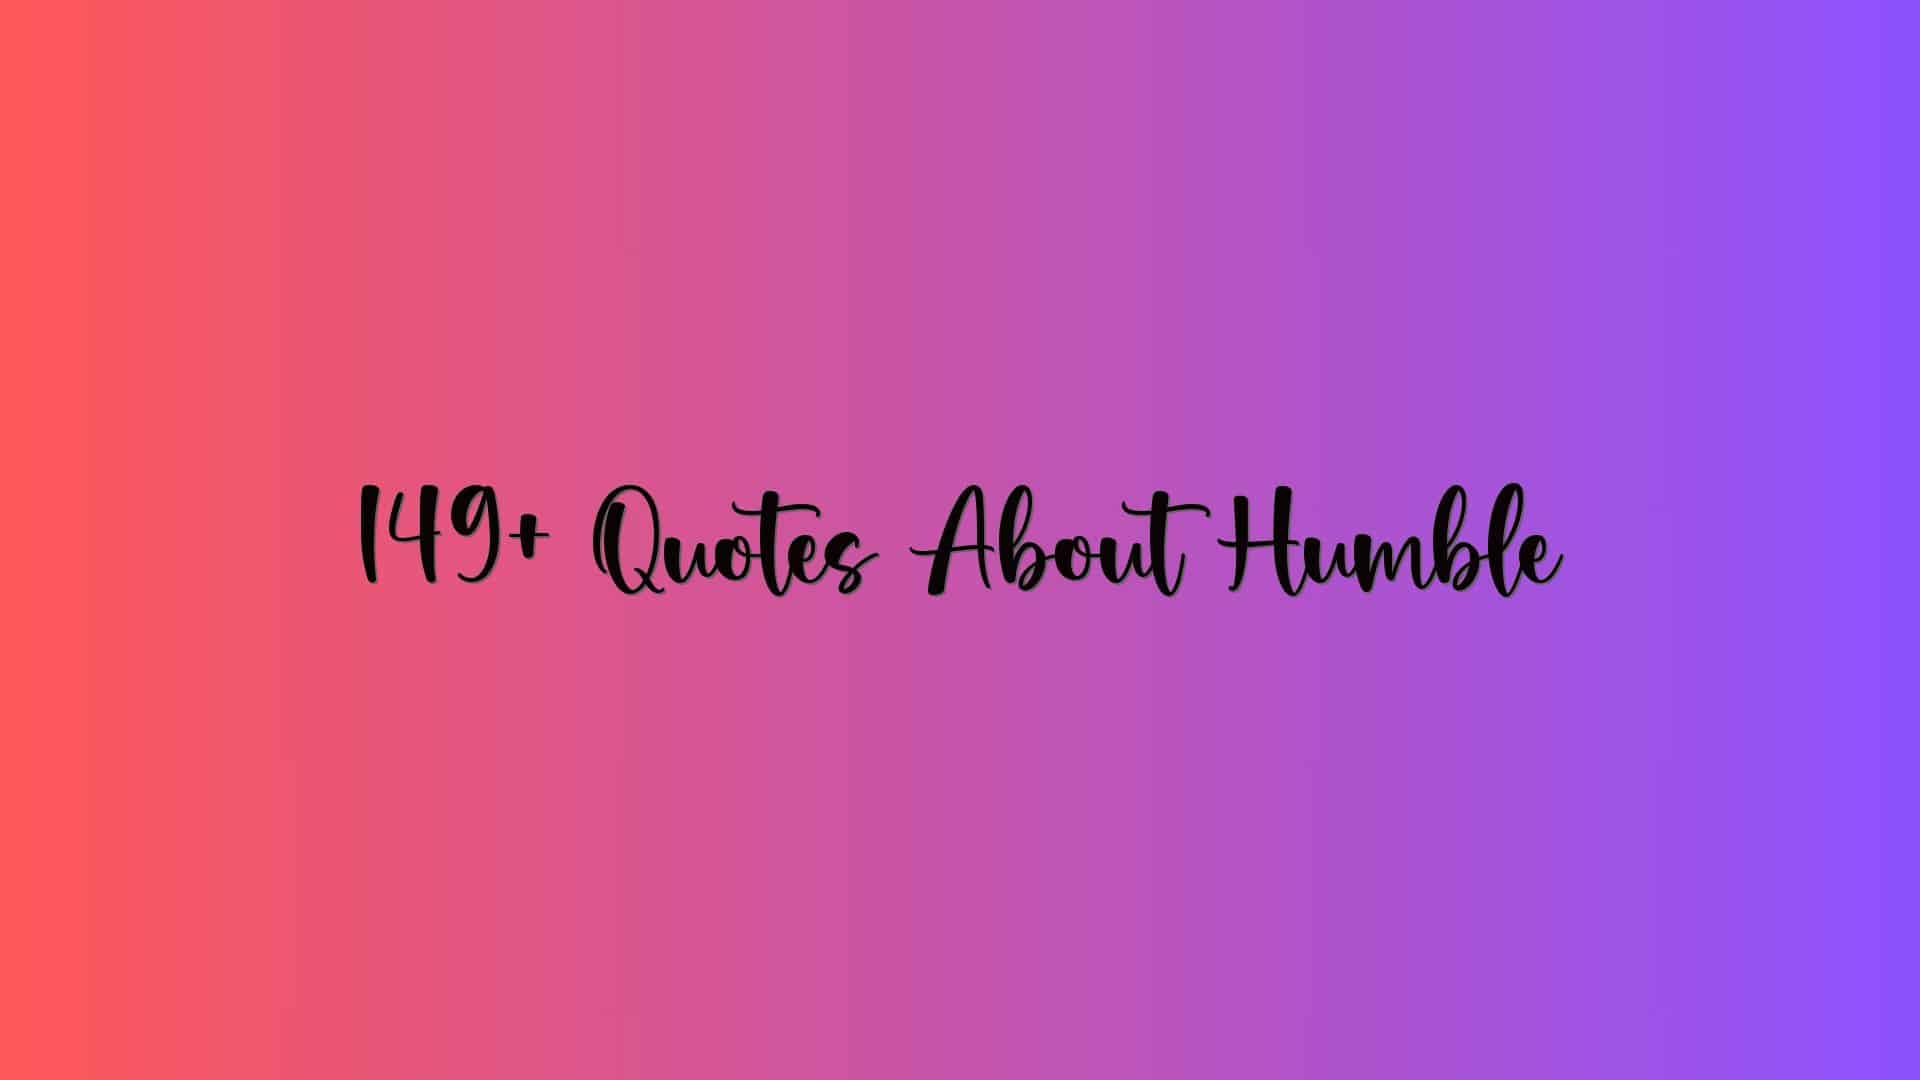 149+ Quotes About Humble